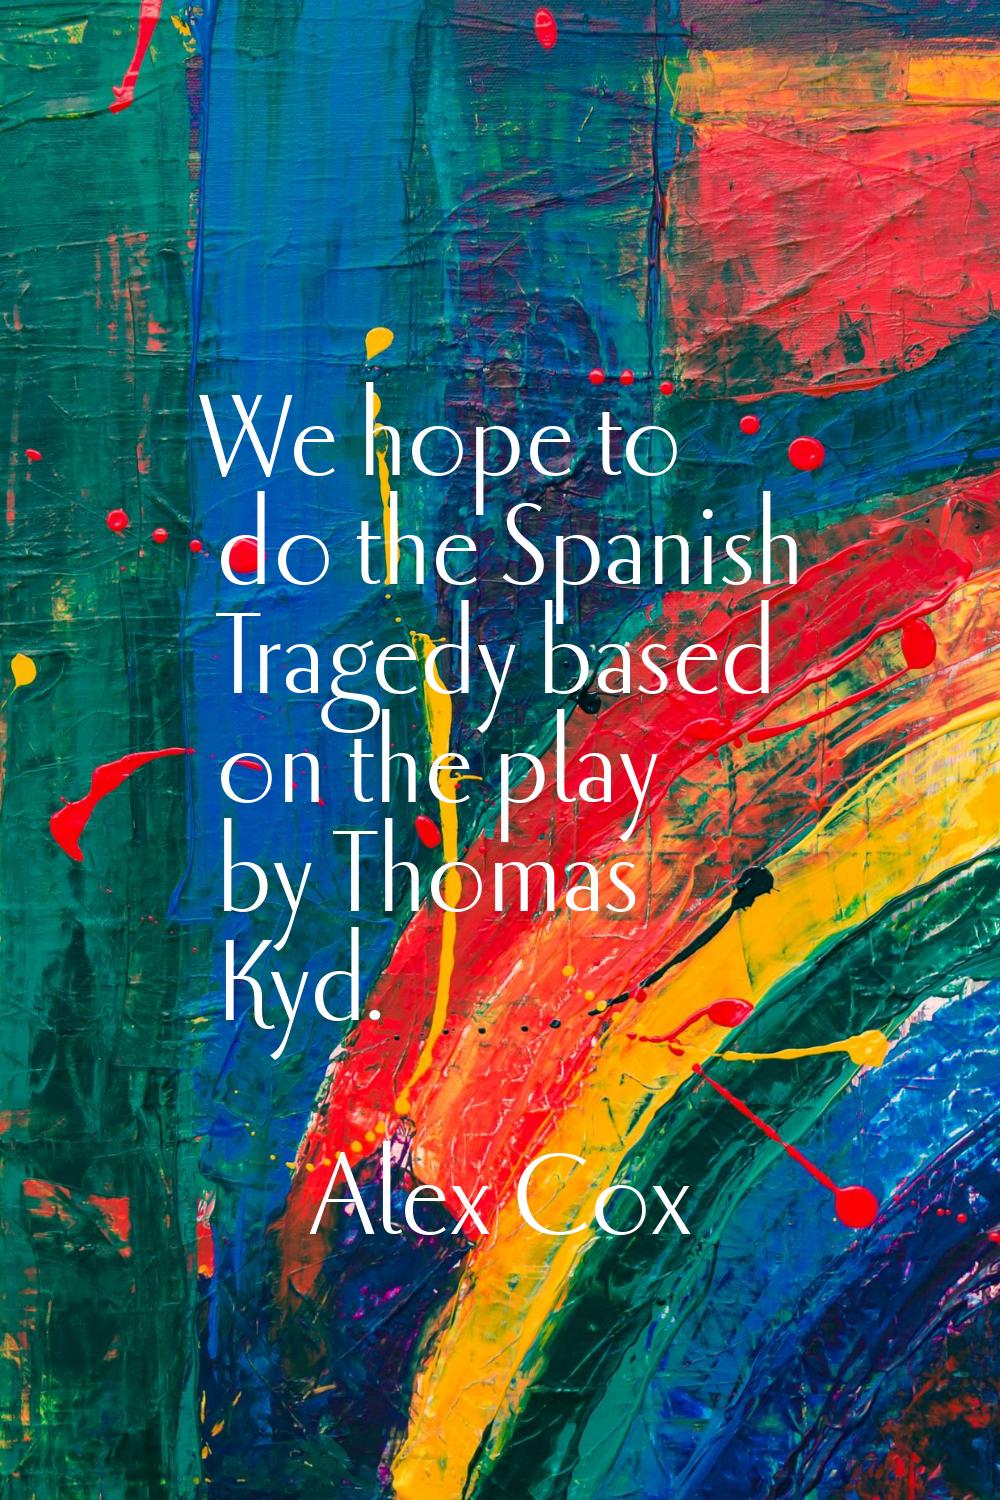 We hope to do the Spanish Tragedy based on the play by Thomas Kyd.